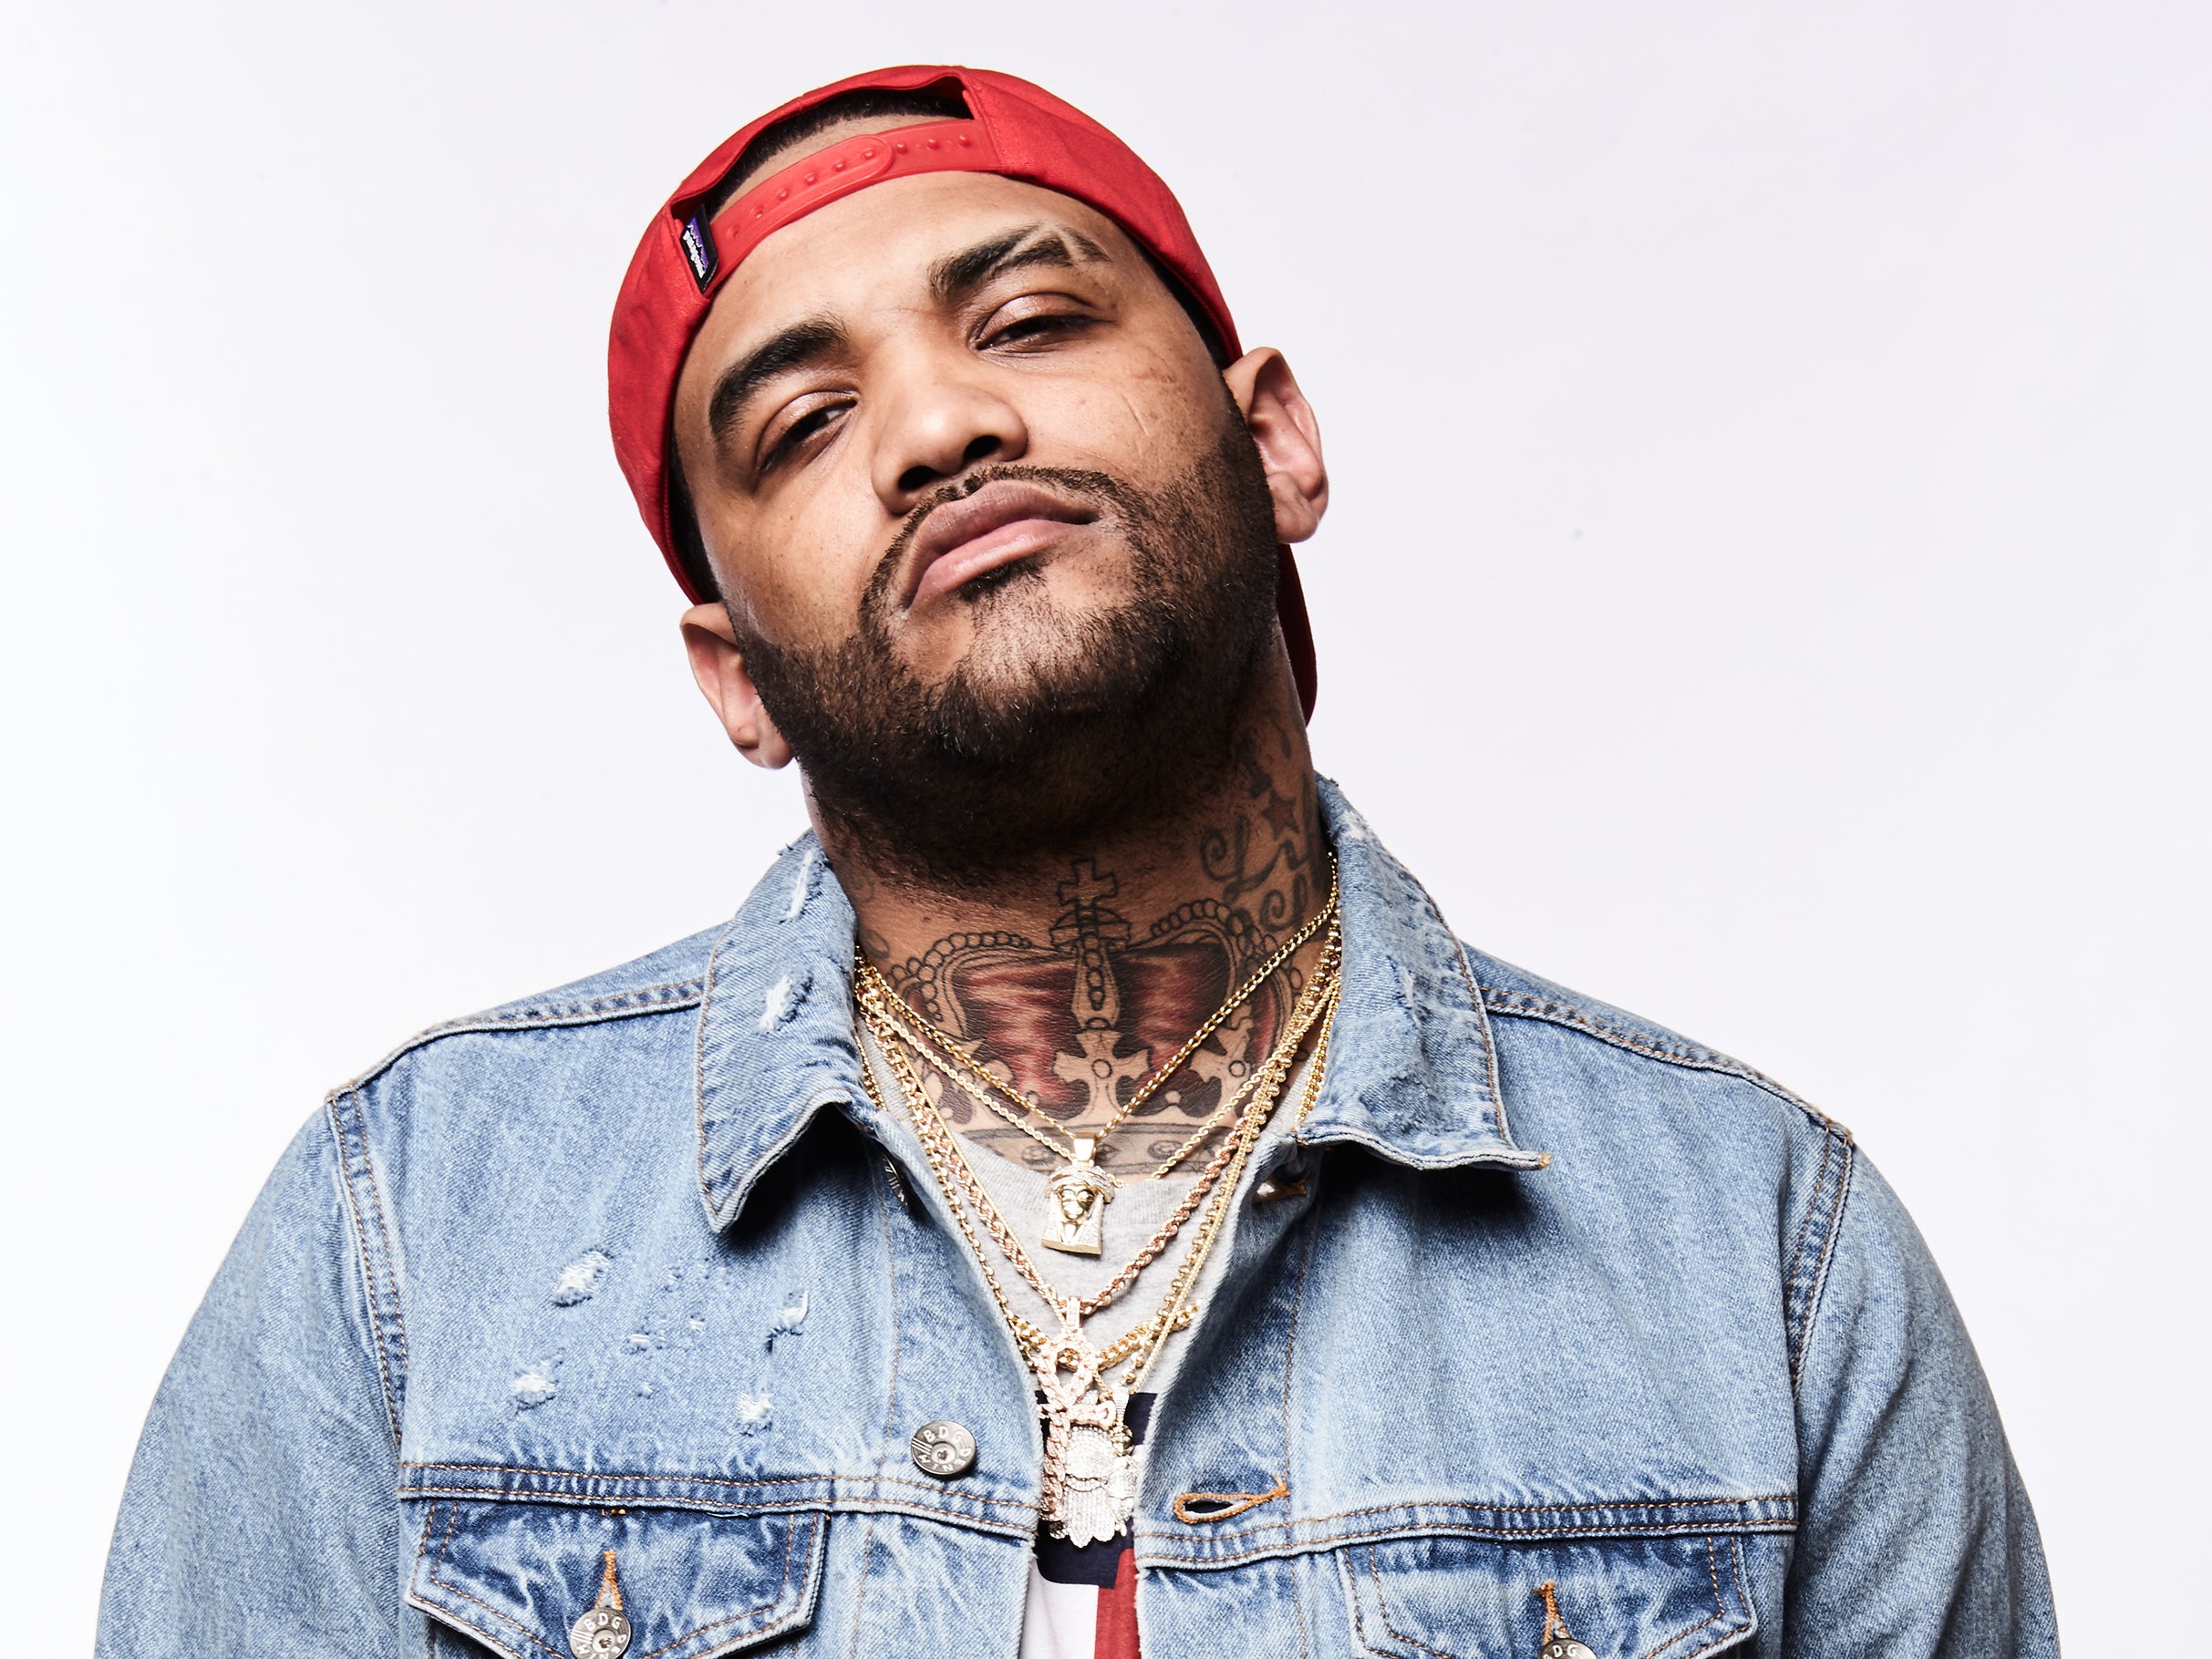 Joyner Lucas: Not Now, I'm Busy Tour. presale password for approved tickets in Minneapolis